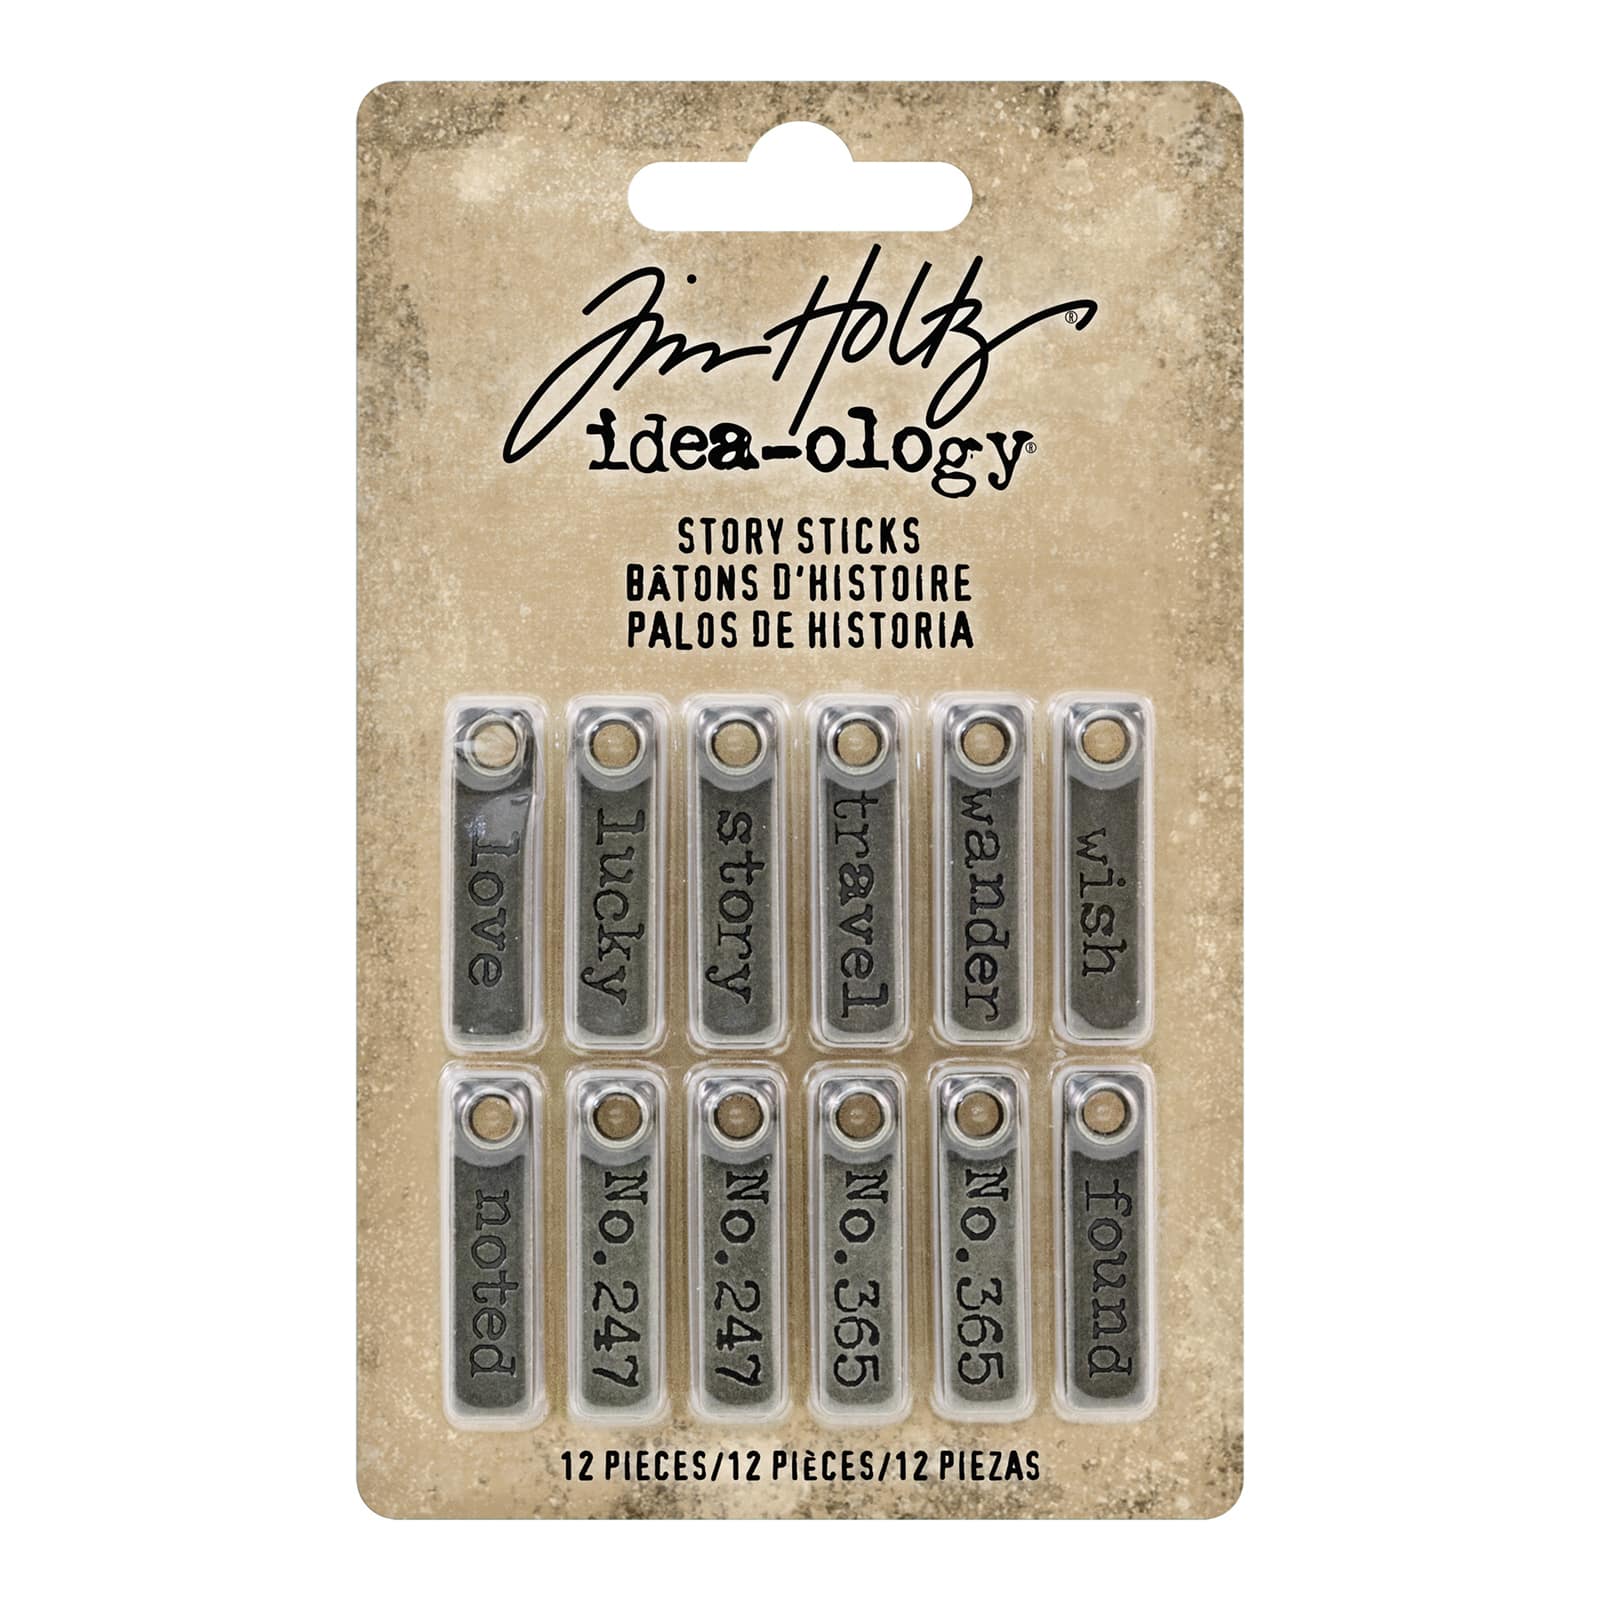 Find the Tim Holtz® Idea-Ology® Story Sticks at Michaels